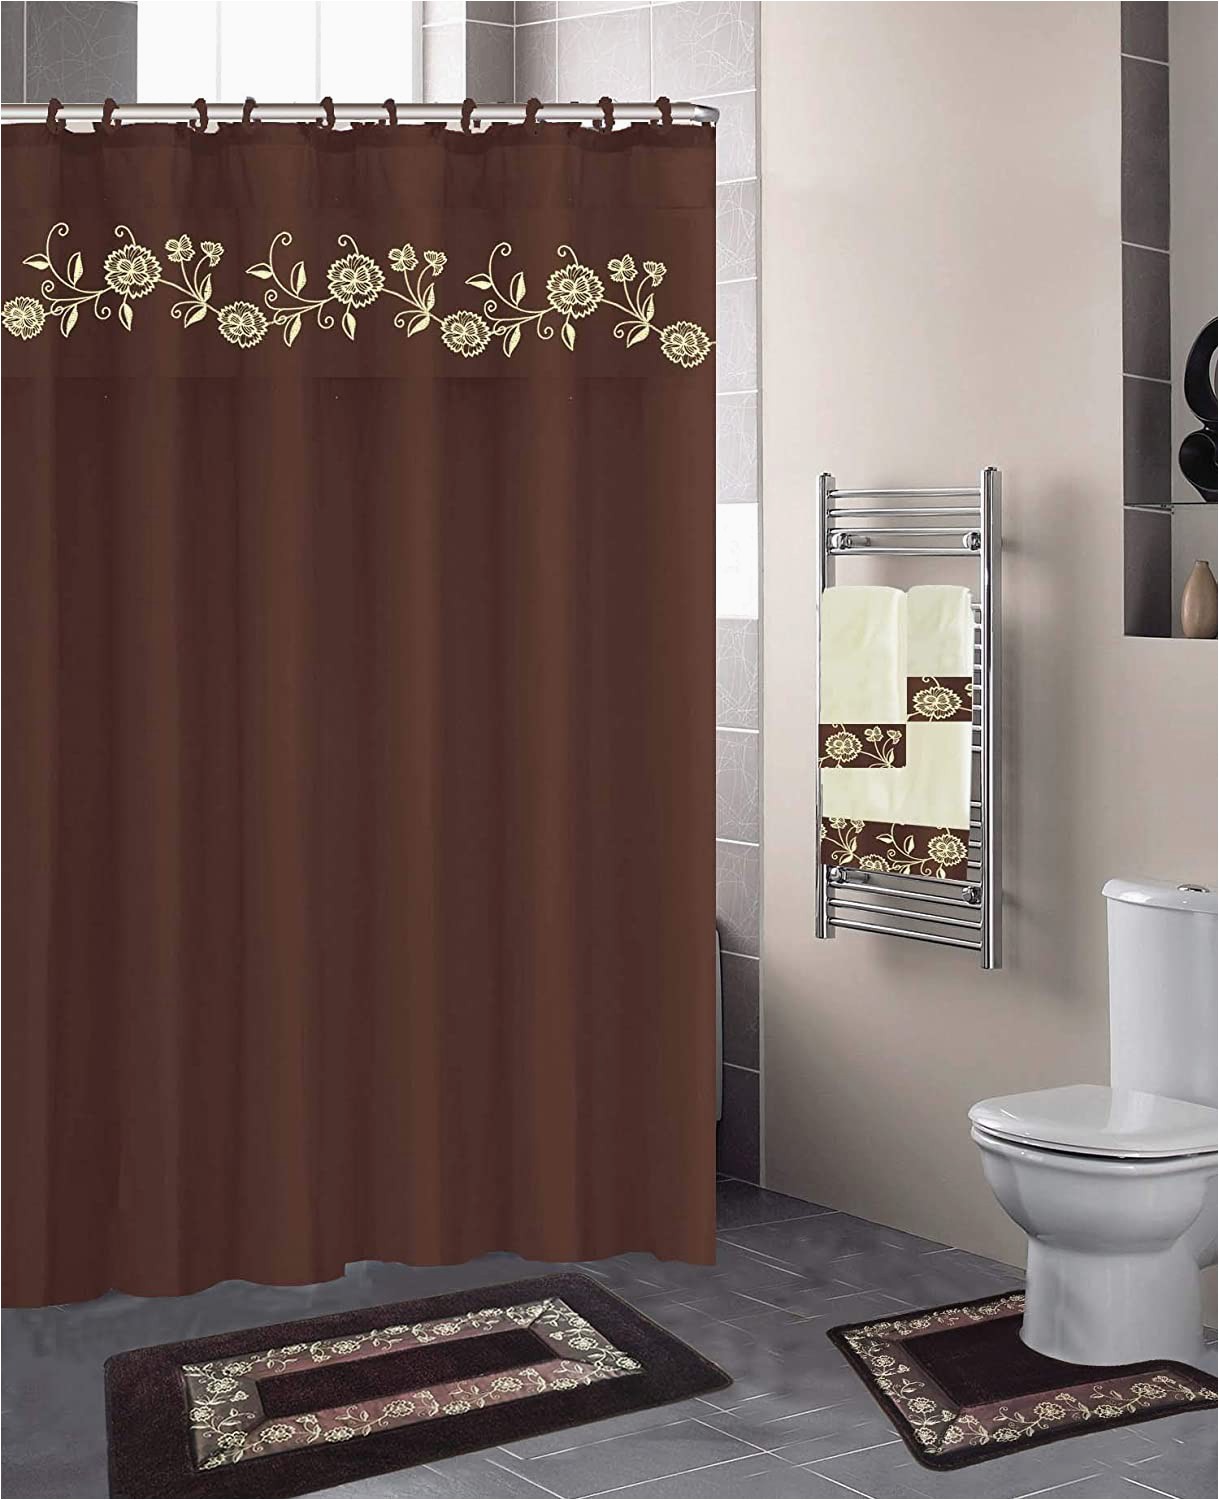 Chocolate Bathroom Rug Sets Luxury Home Collection 18 Pc Bath Rug Set Embroidery Non Slip Bathroom Rug Mats and Rug Contour and Shower Curtain and towels and Rings Hooks and